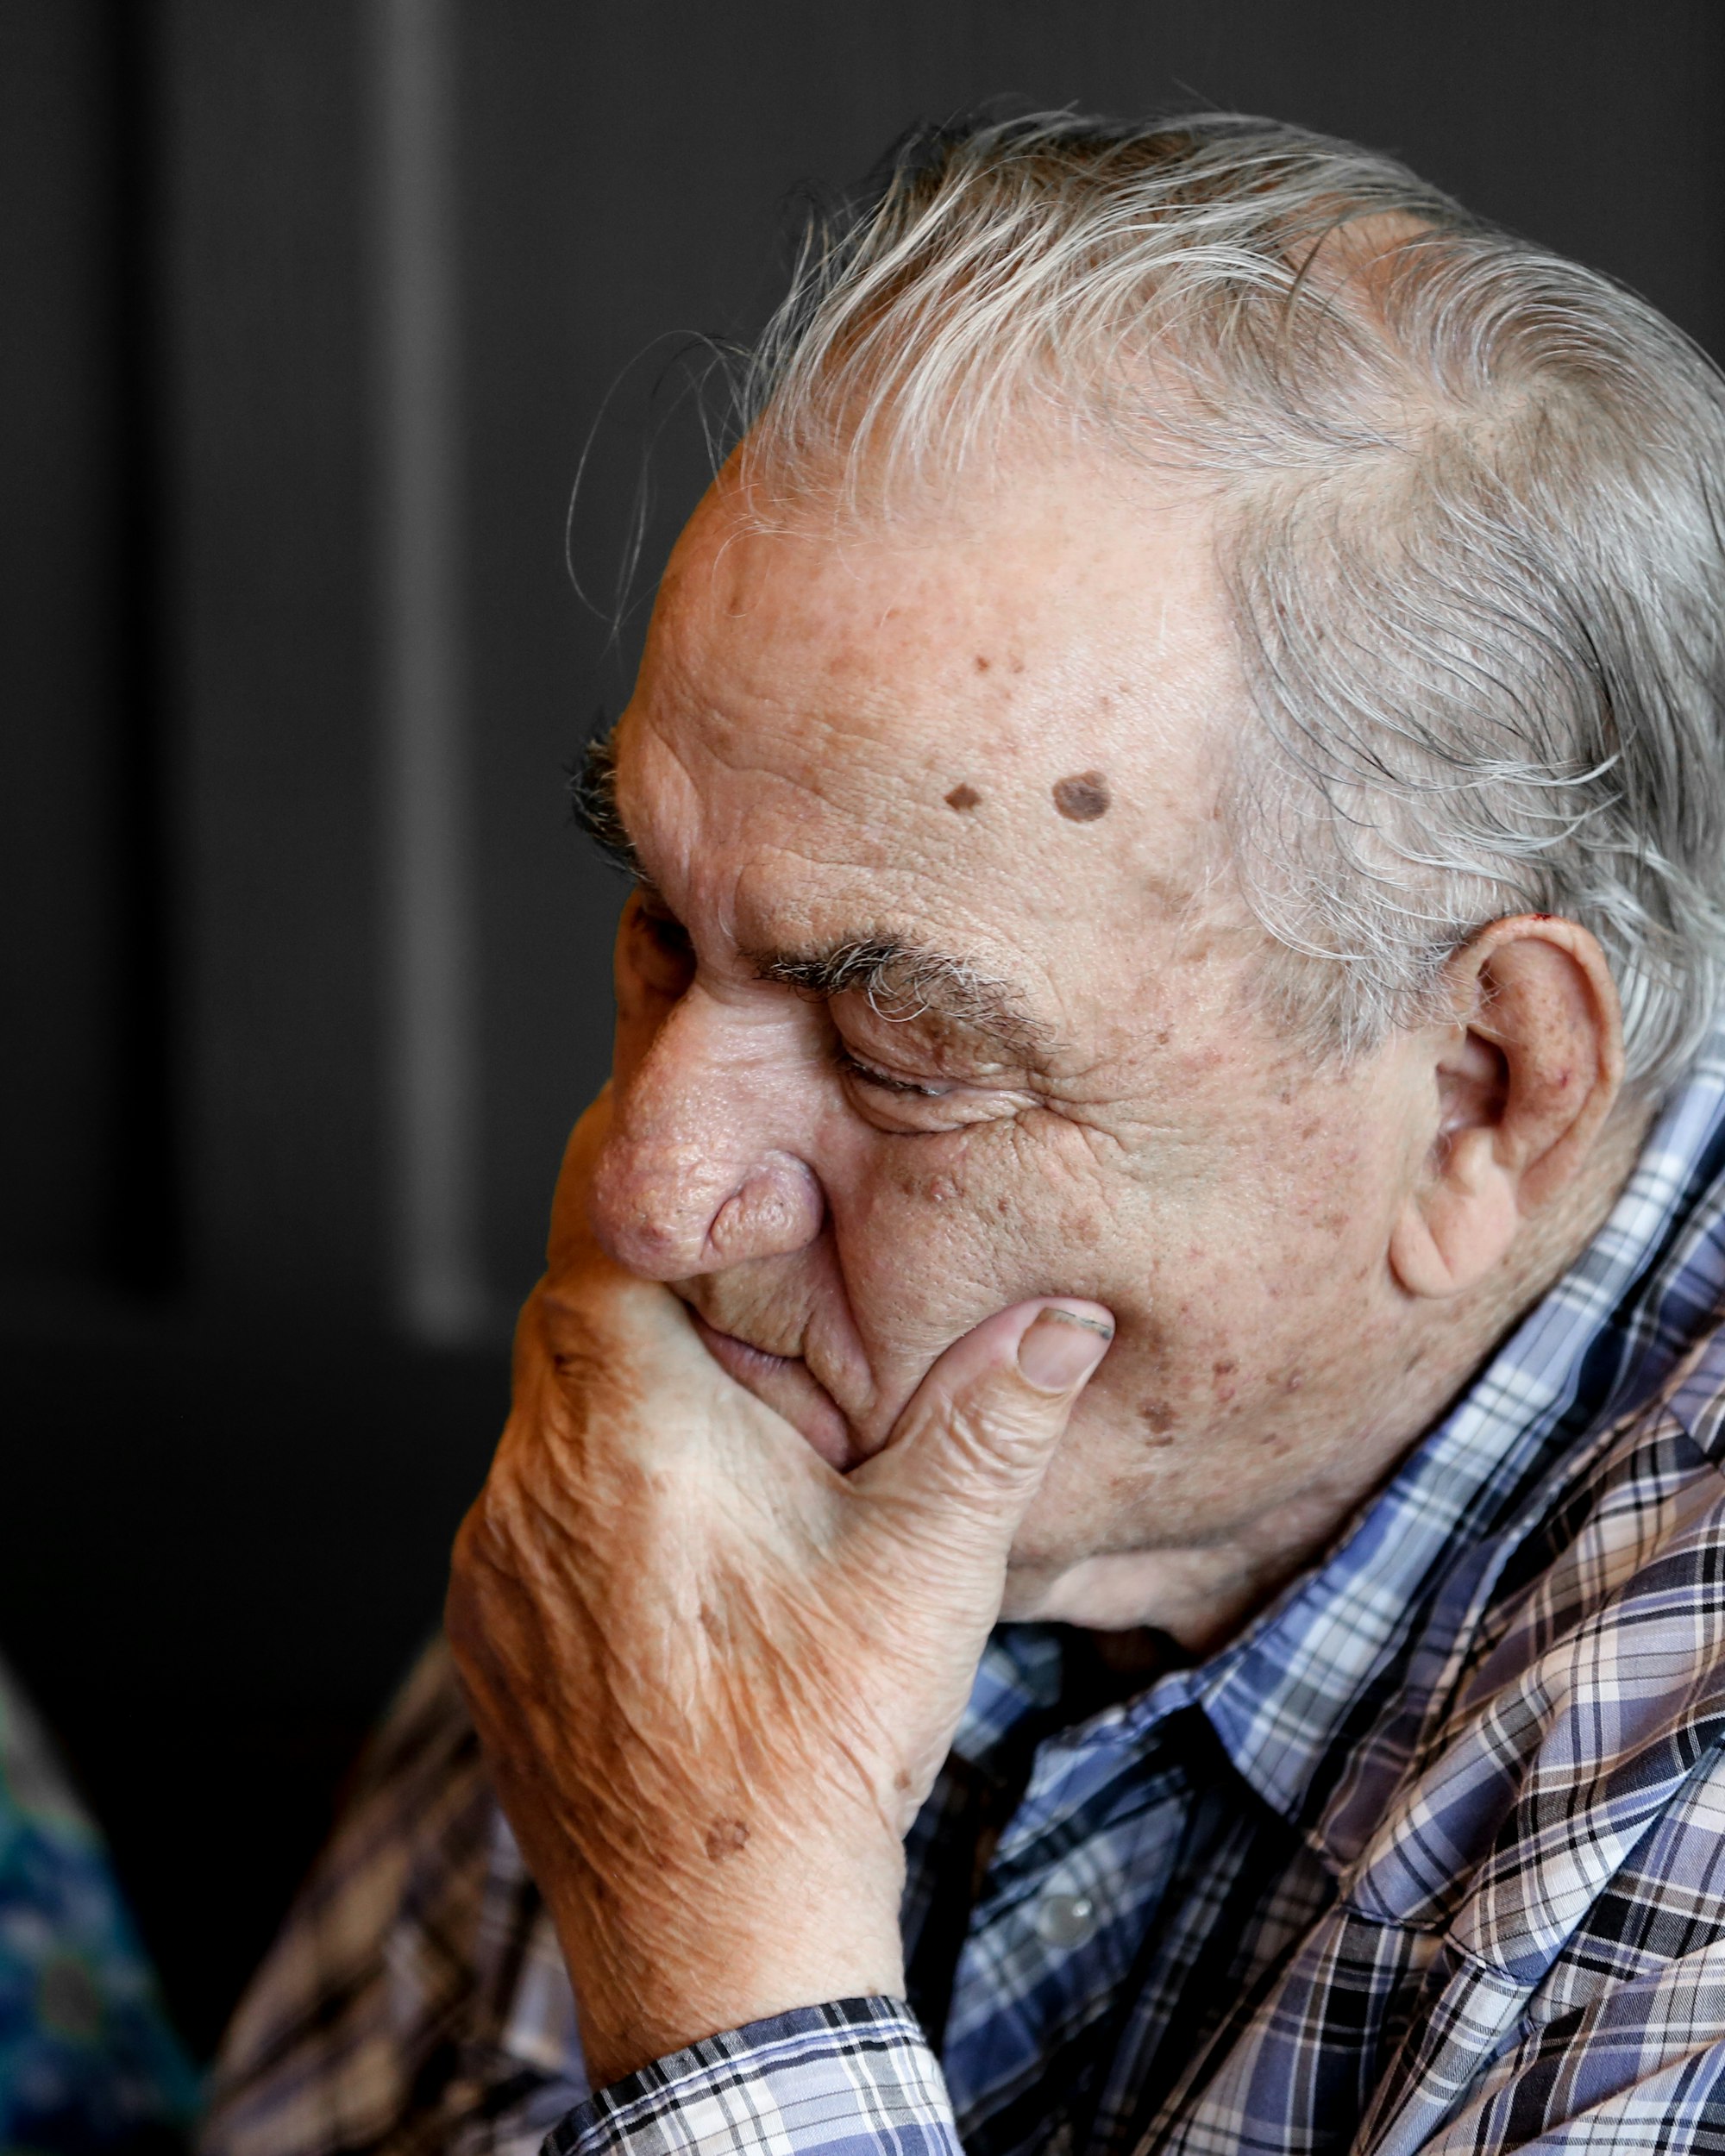 Complications of Frontal Lobe Dementia (FTD): Our Housing Loss